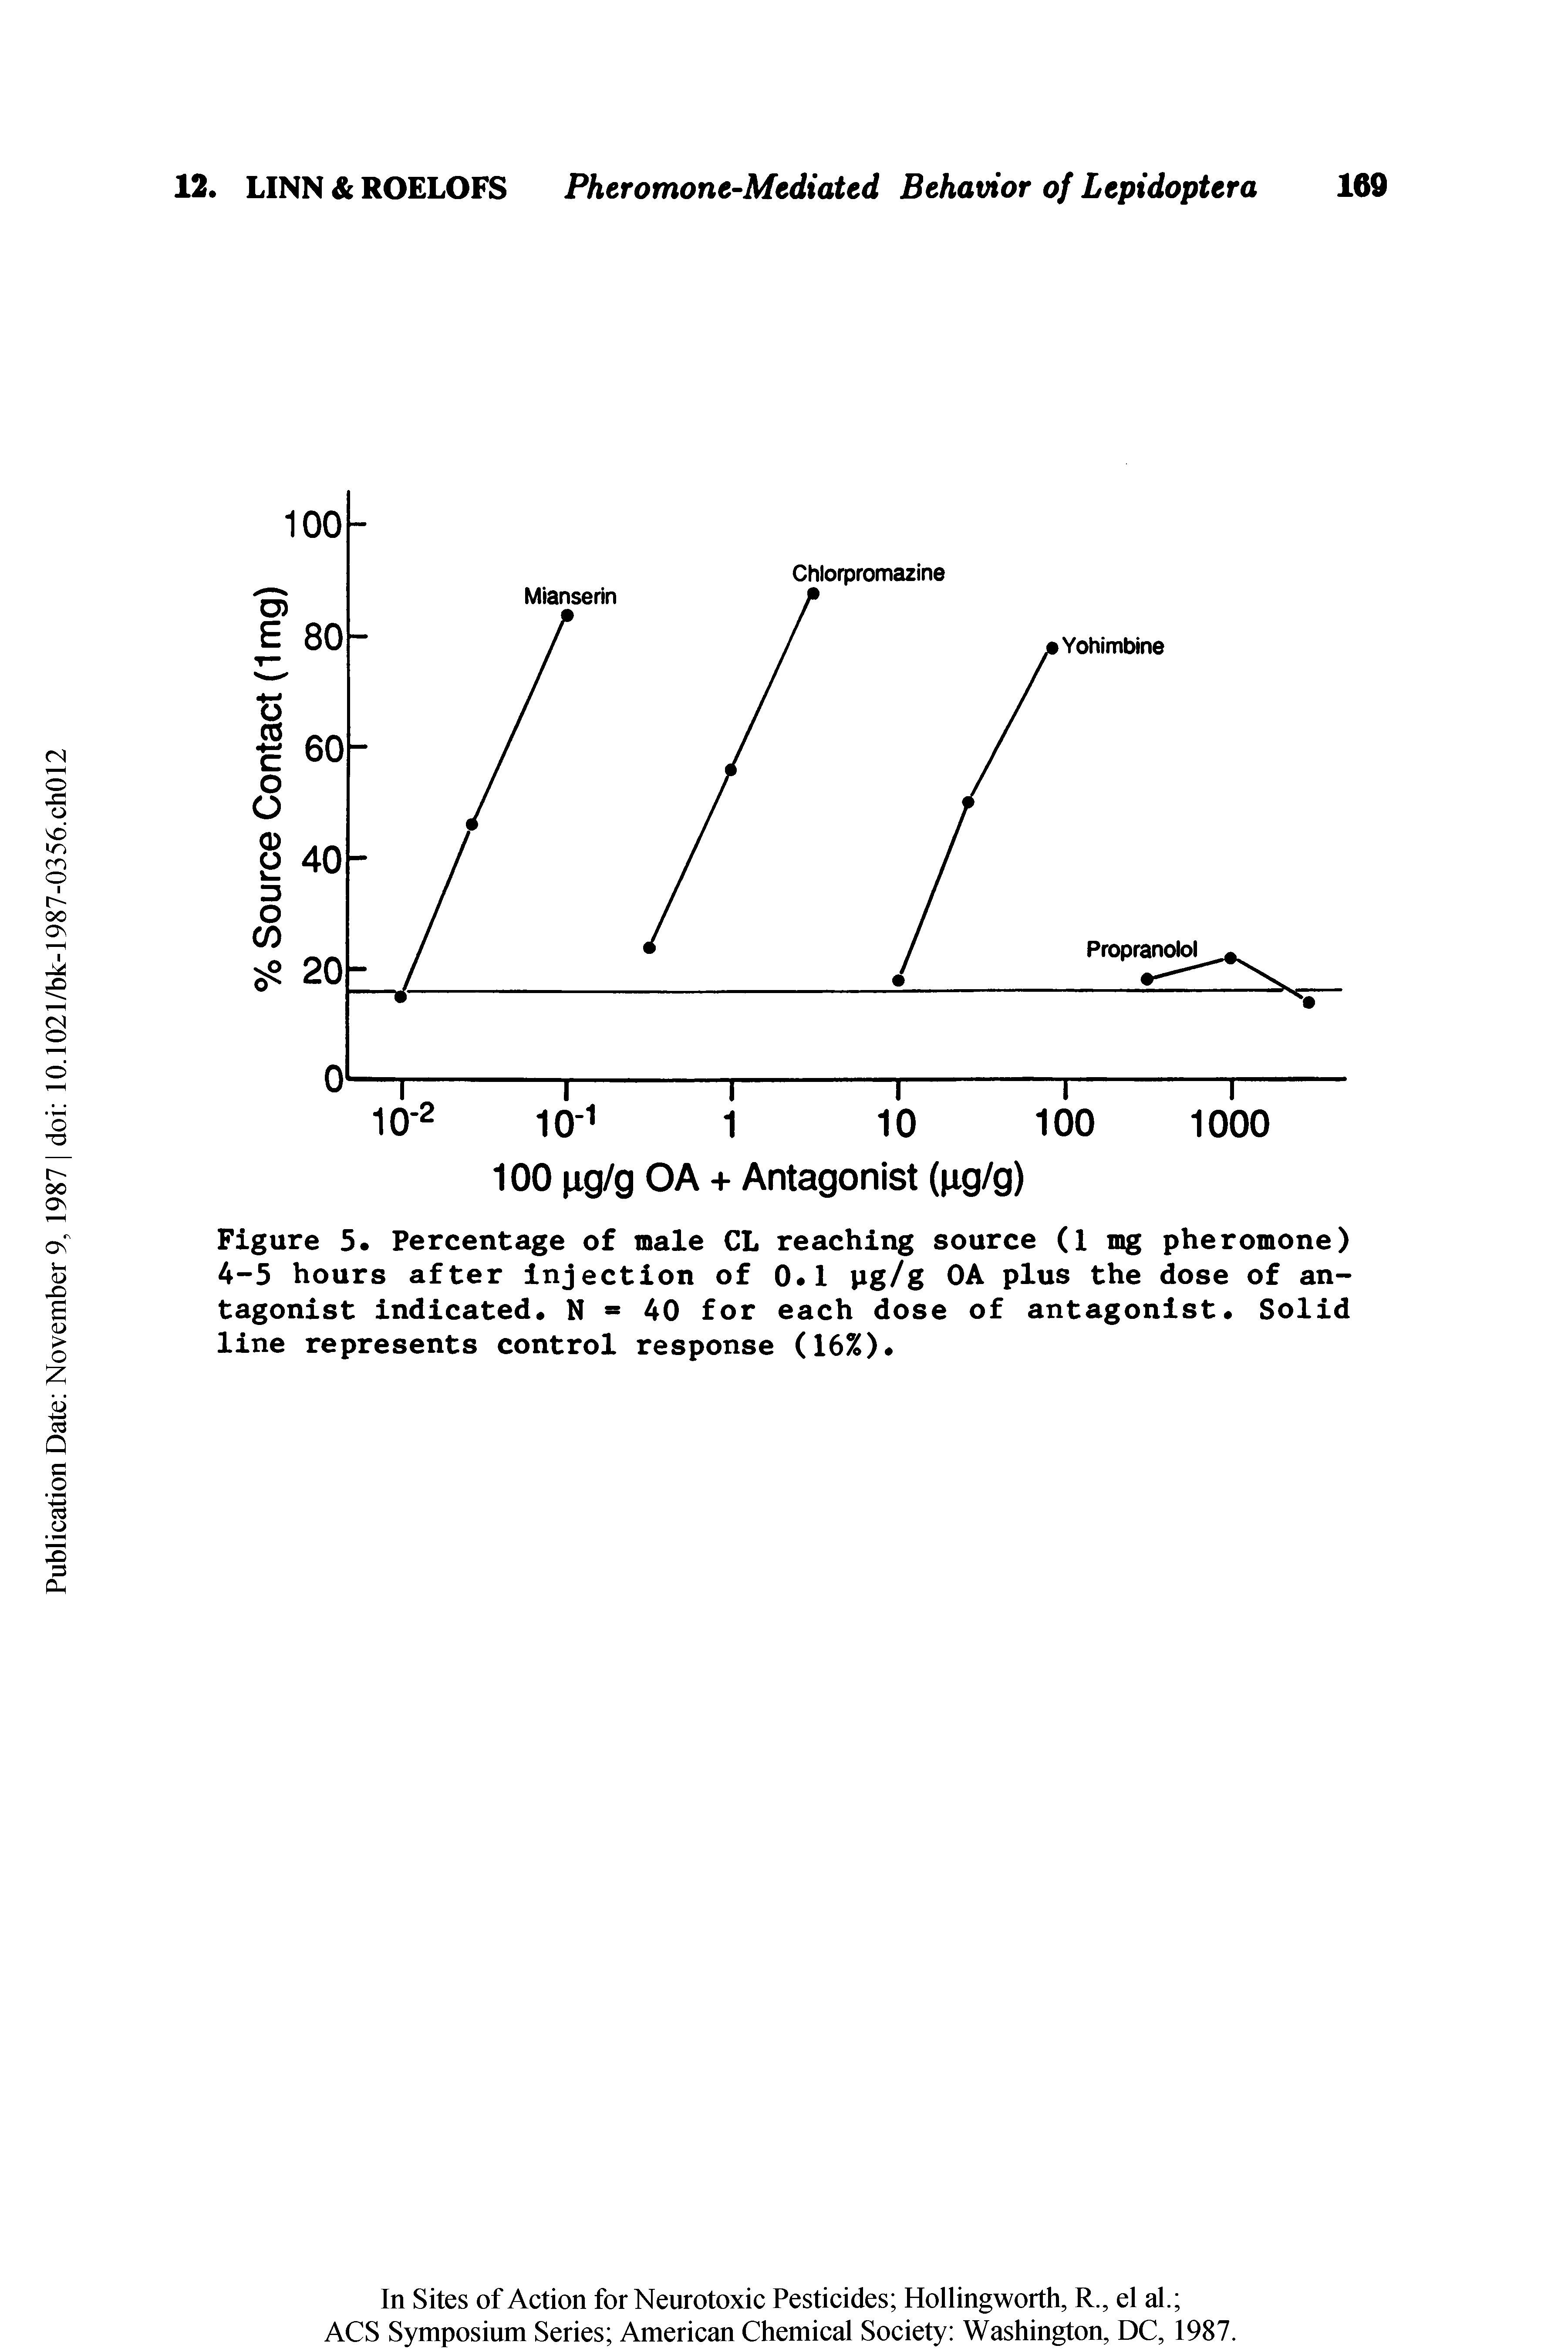 Figure 5. Percentage of male CL reaching source (1 mg pheromone) 4-5 hours after injection of 0.1 pg/g OA plus the dose of antagonist indicated N 40 for each dose of antagonist. Solid line represents control response (16%).